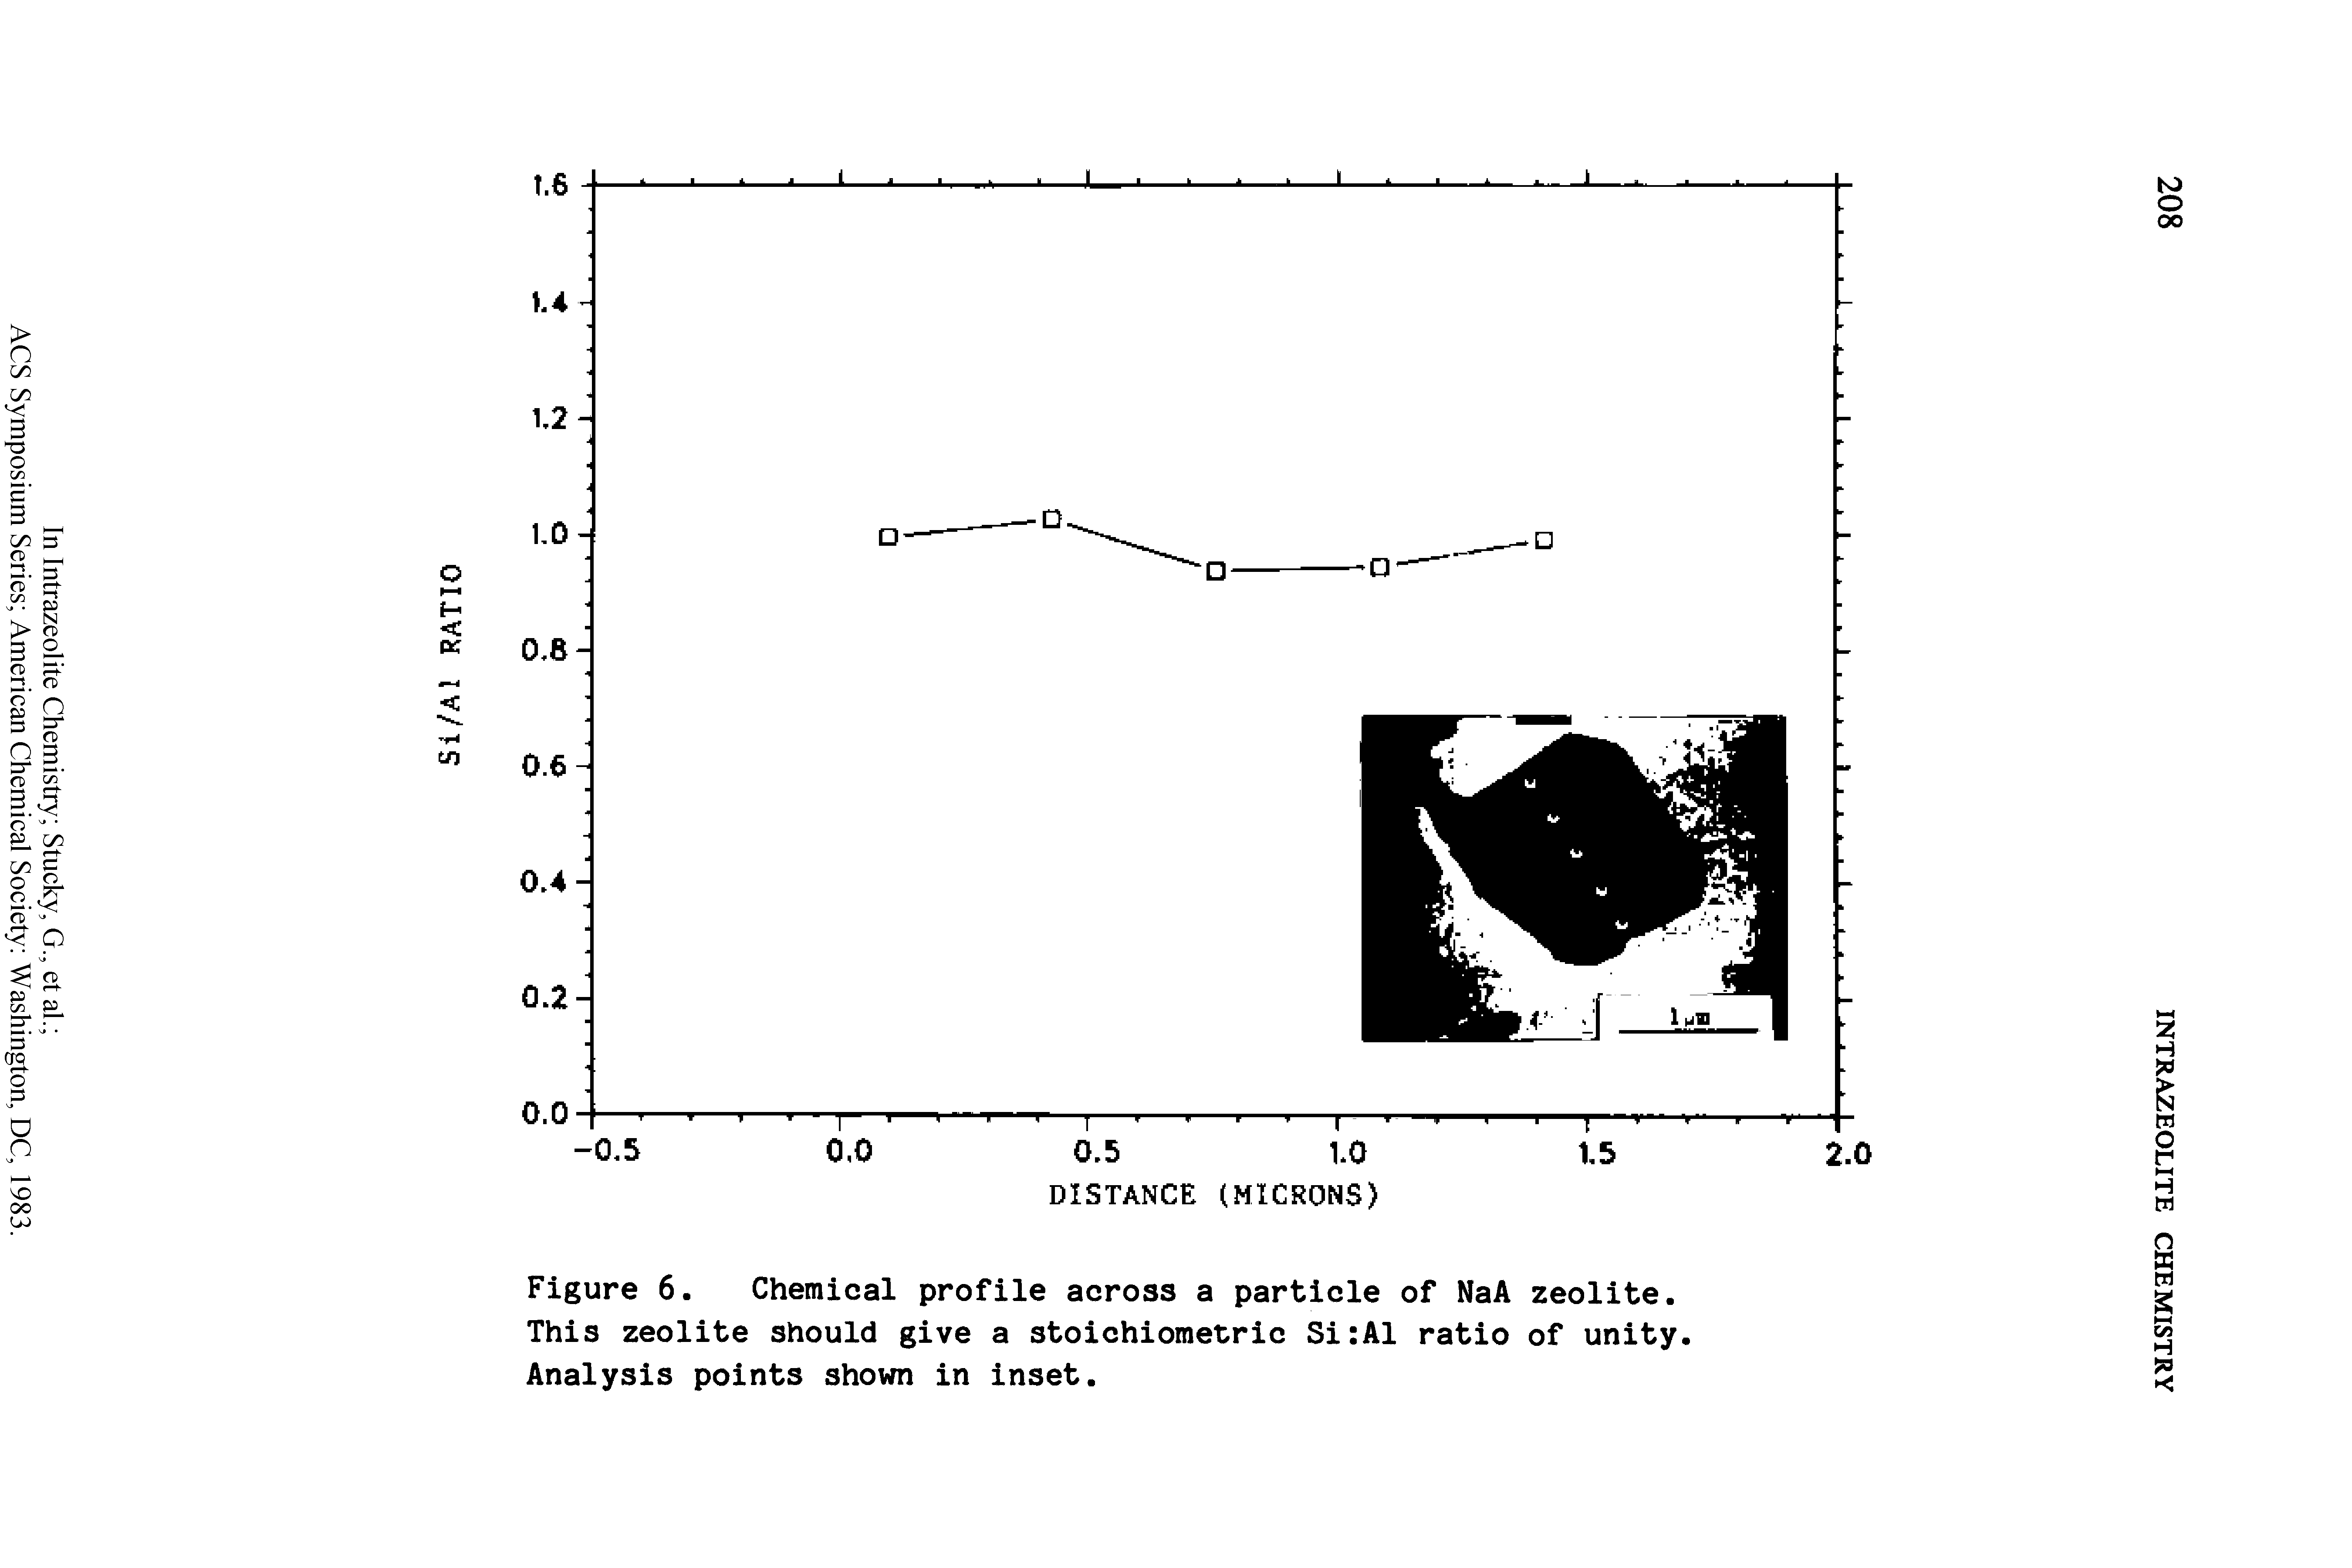 Figure 6. Chemical profile across a particle of NaA zeolite.